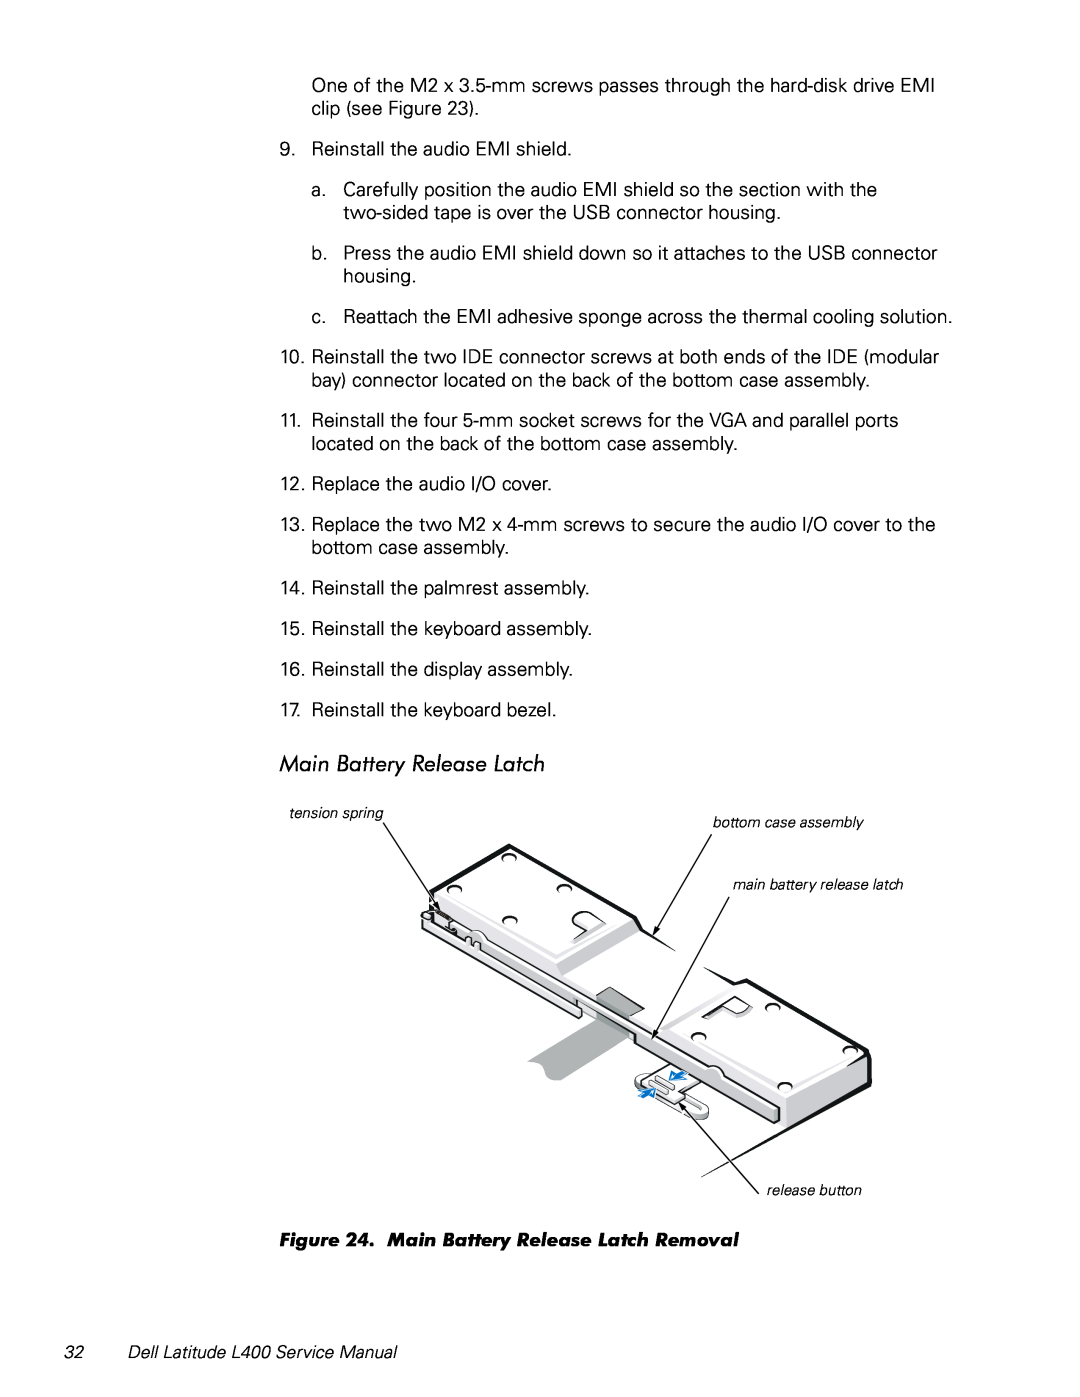 Dell L400 service manual Main Battery Release Latch Removal 